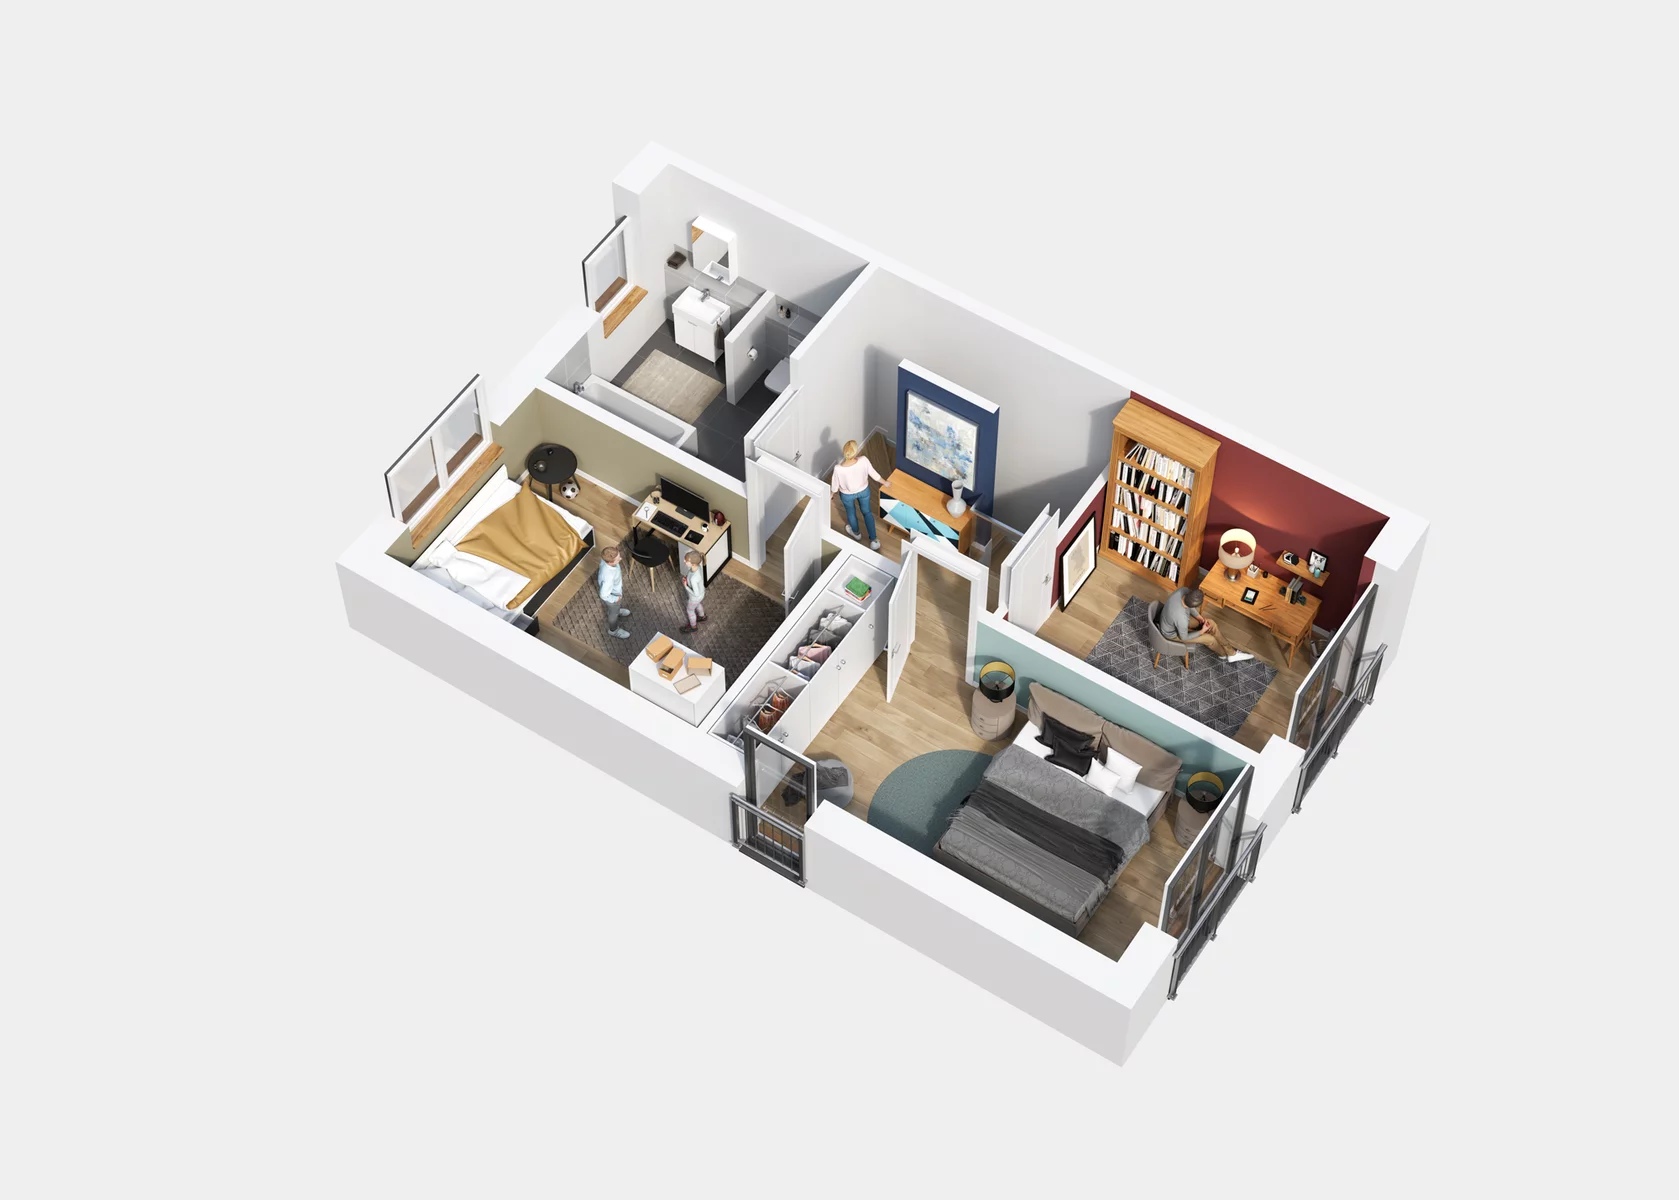 Visualization of the first floor in the house MODERN LIVING 115 in the German city of Halle